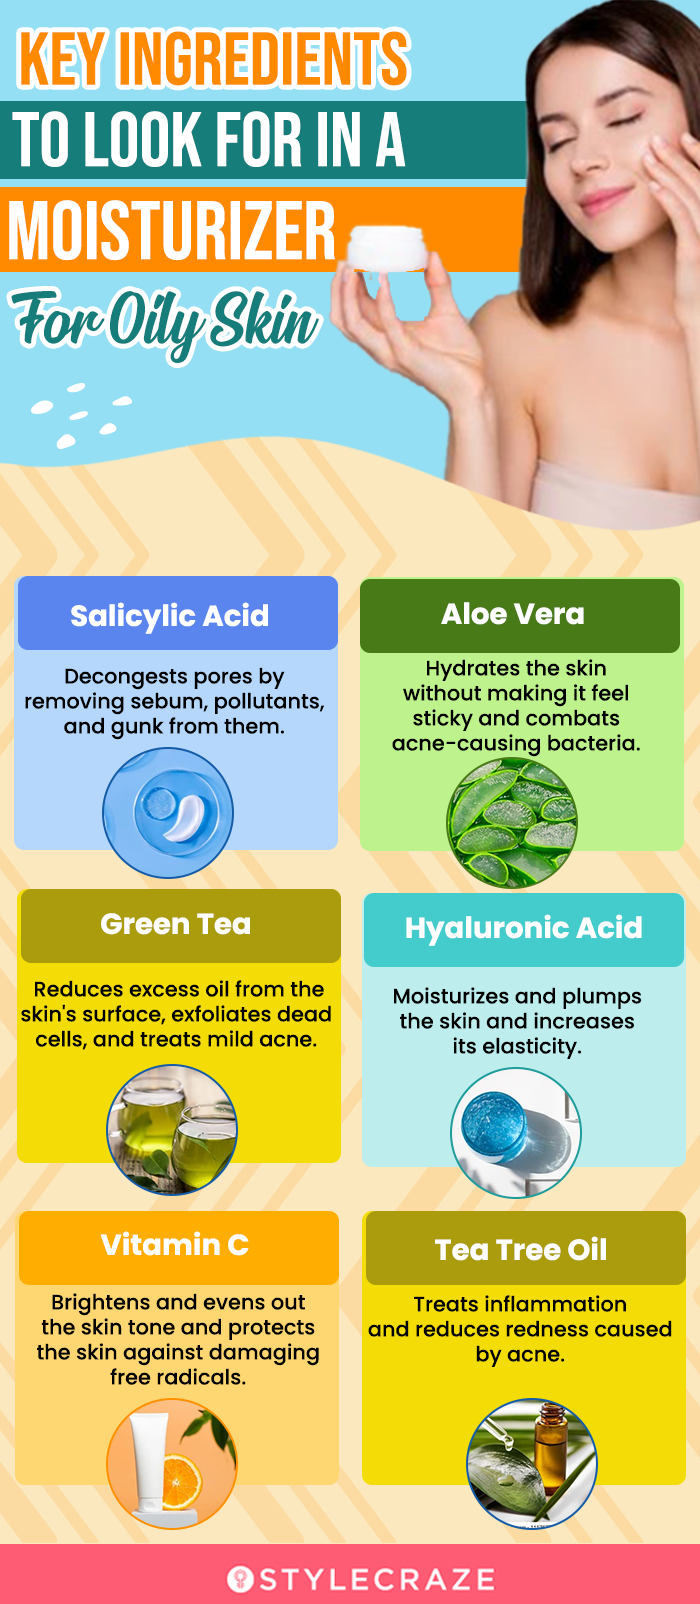 Key Ingredients To Look For In A Moisturizer For Oily Skin (infographic)